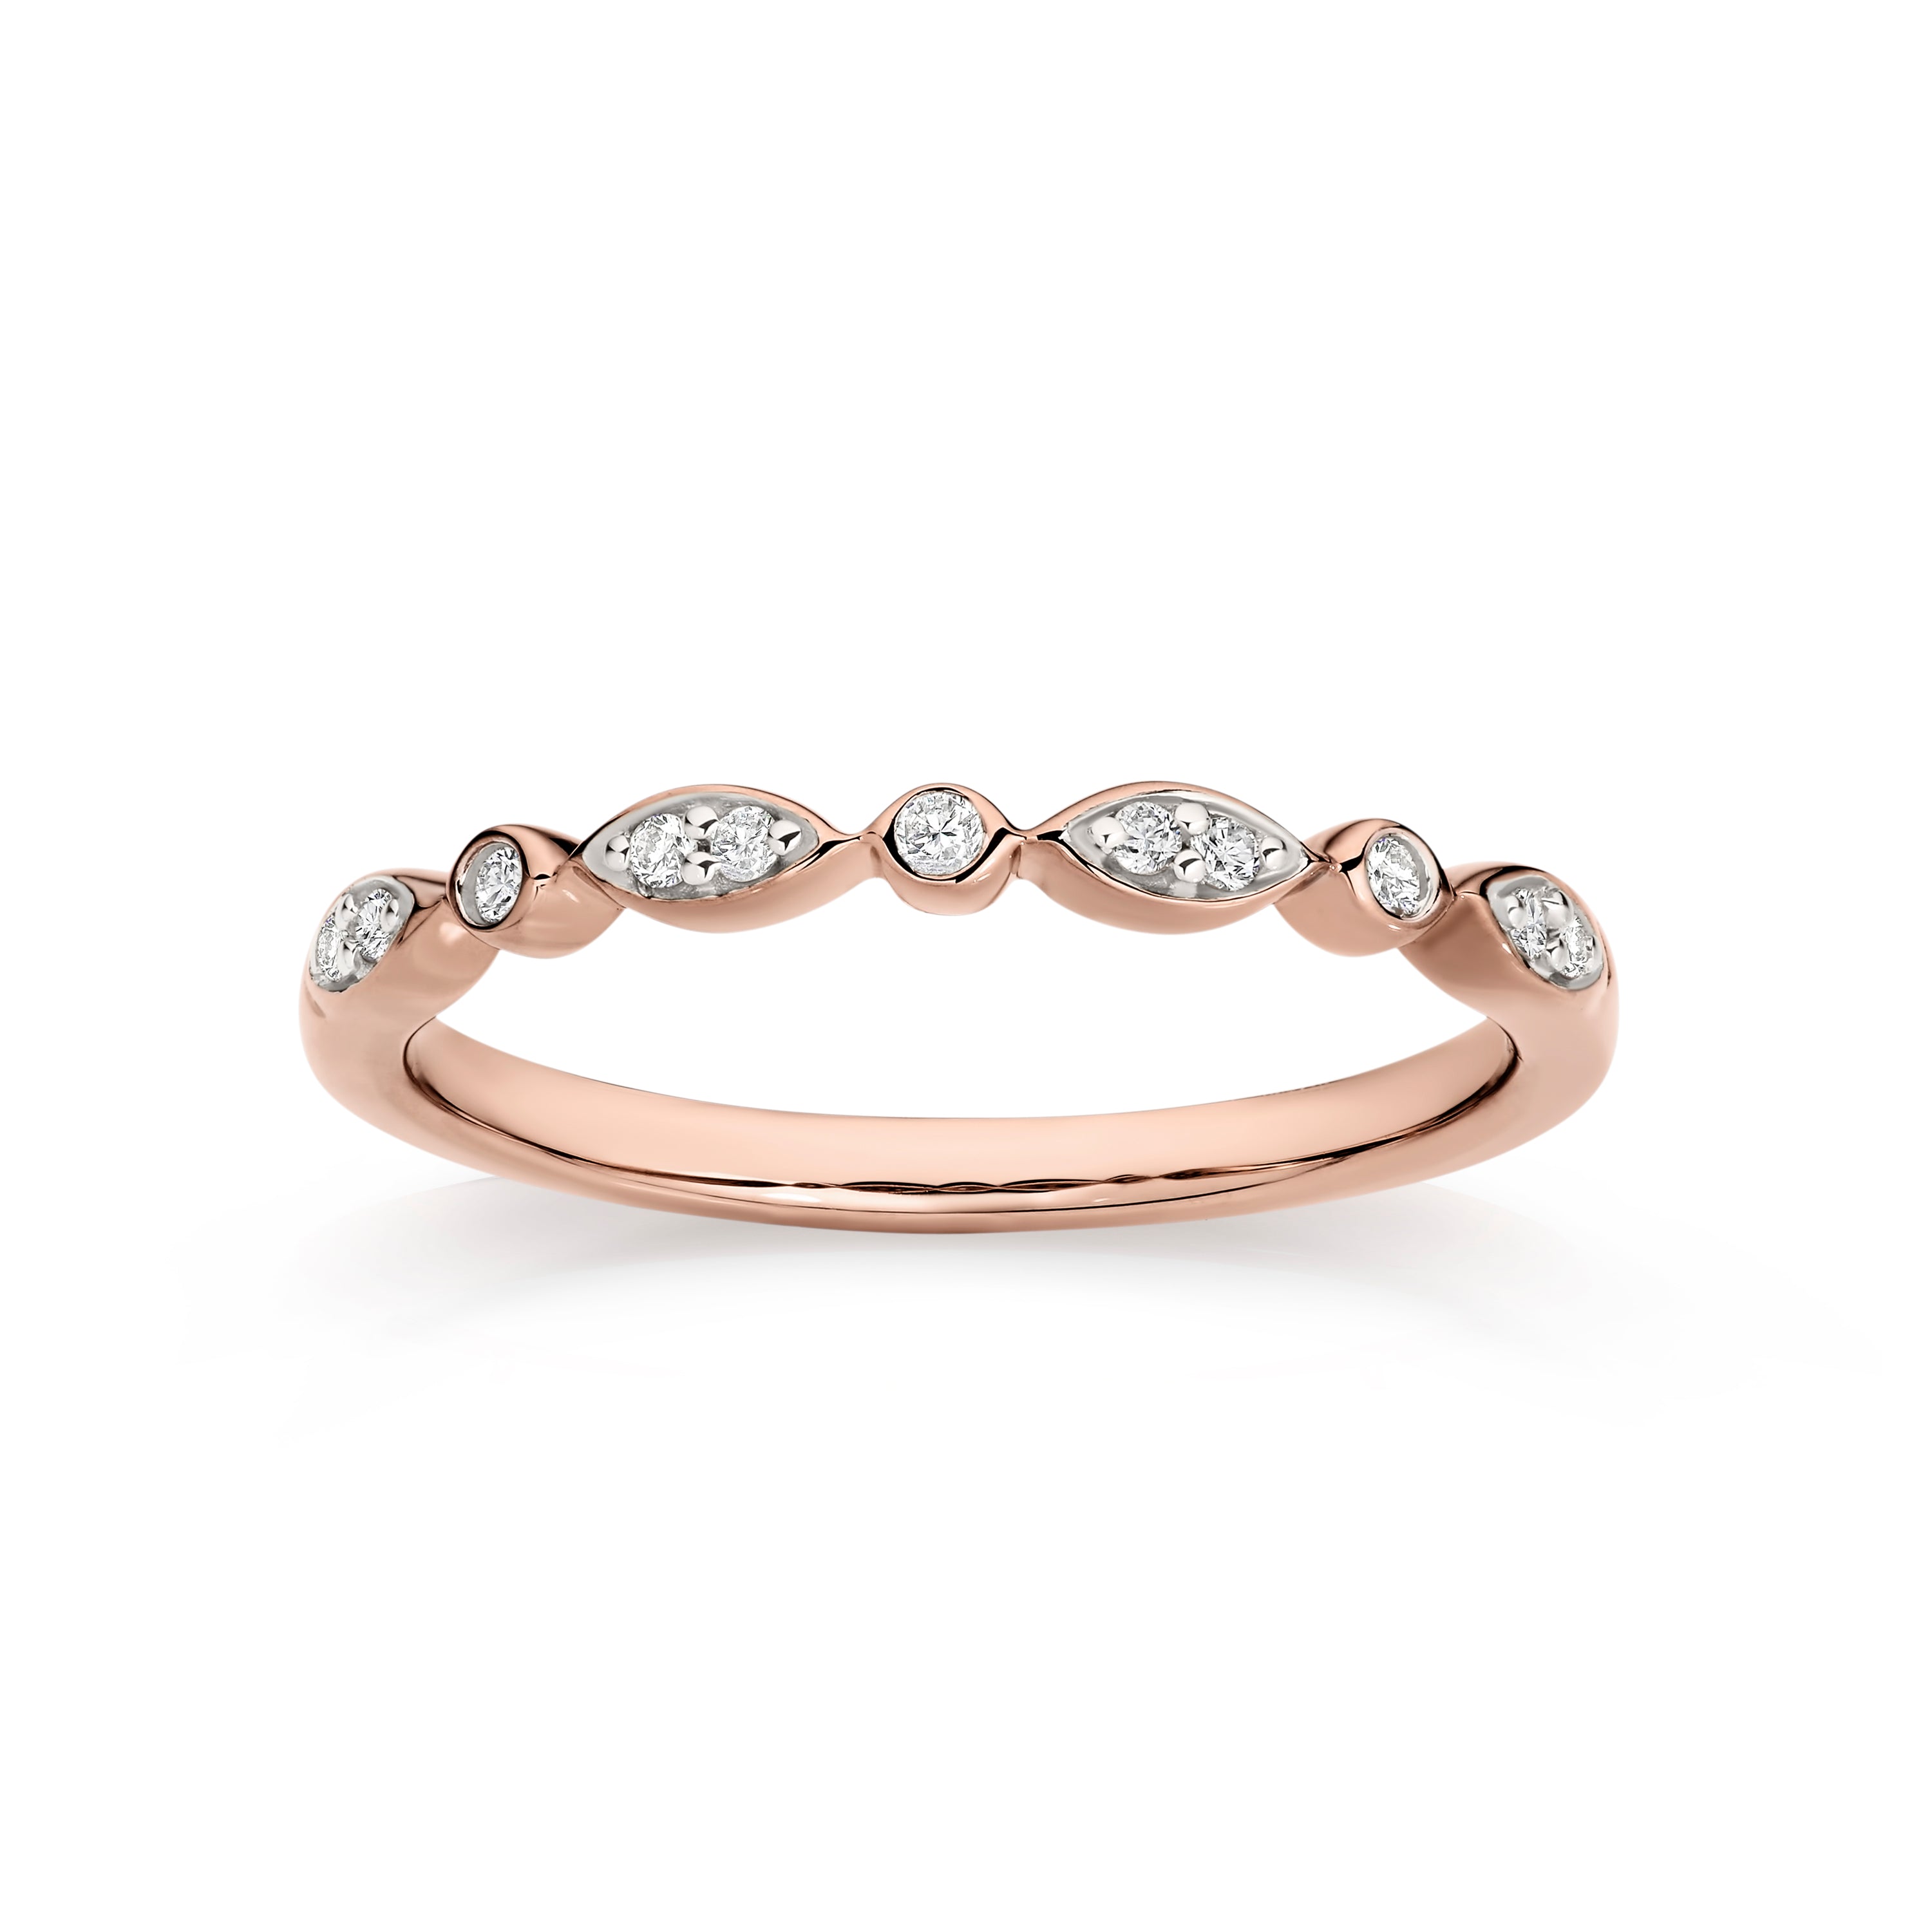 Diamond Marquise shaped Wedding band set in 9ct Rose Gold